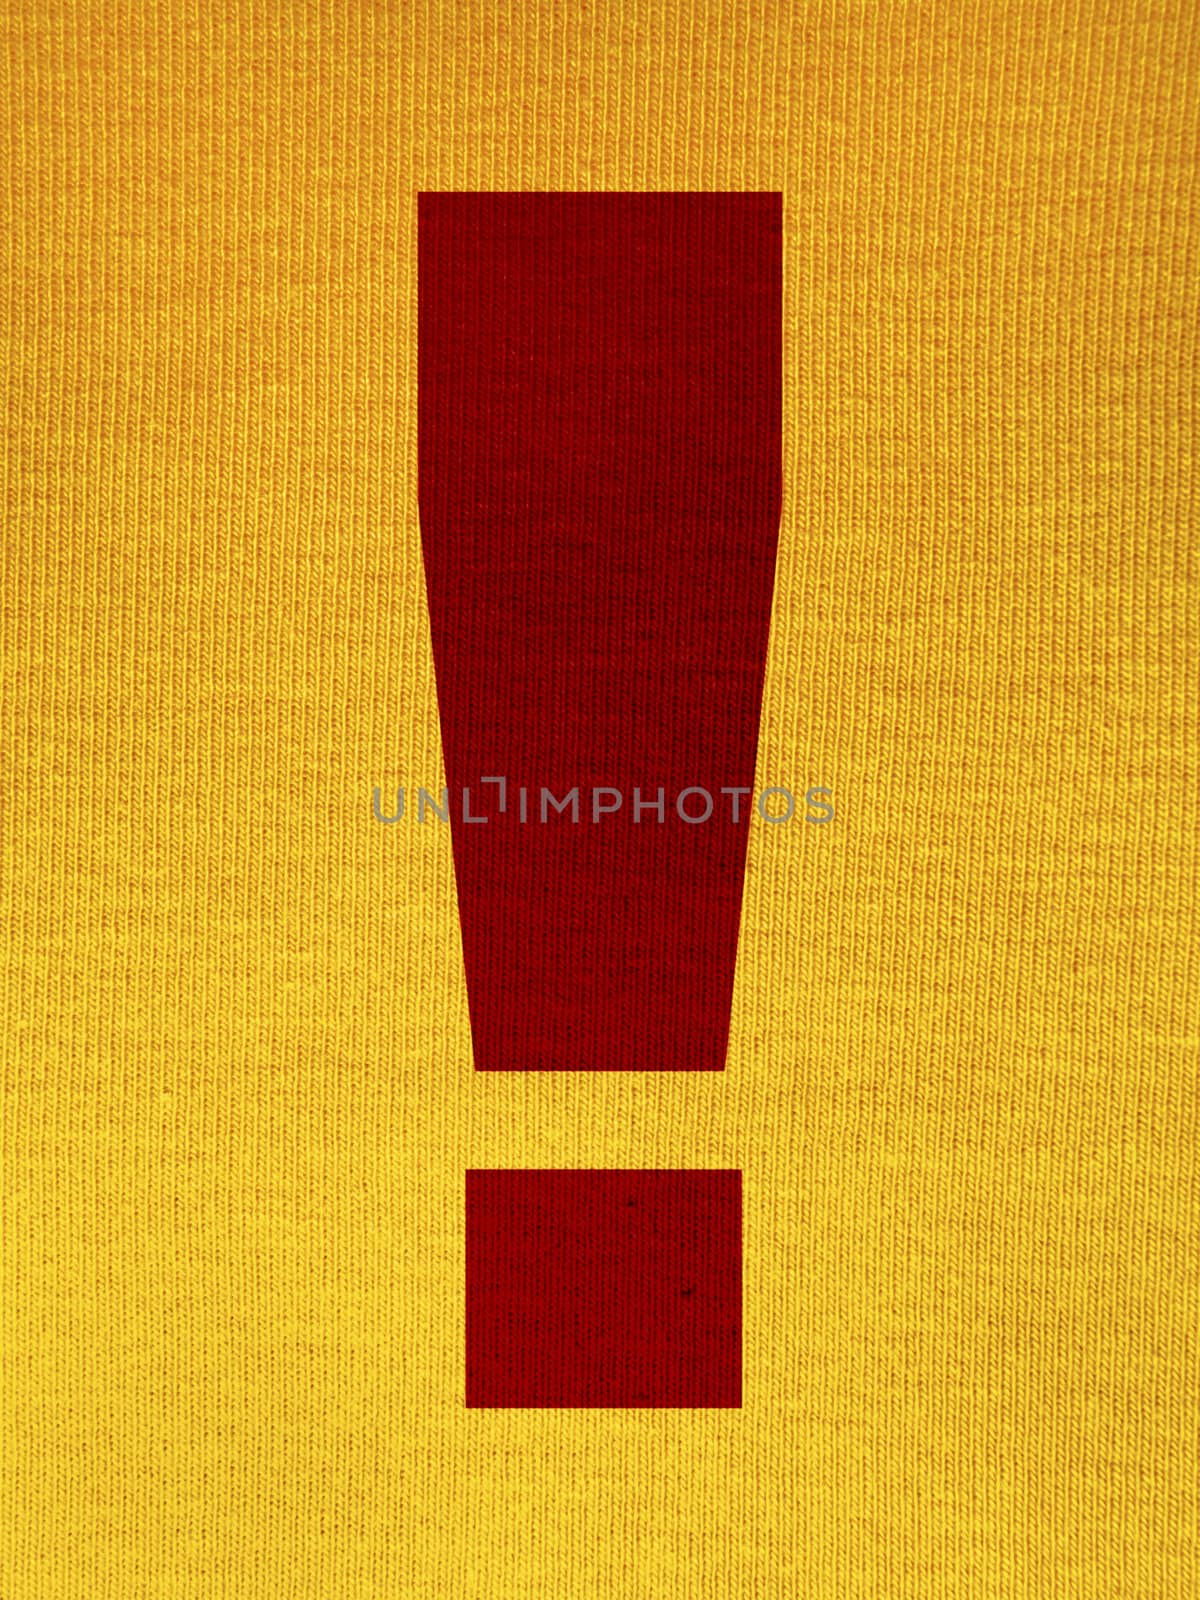 Exclamation point over a yellow tissue background